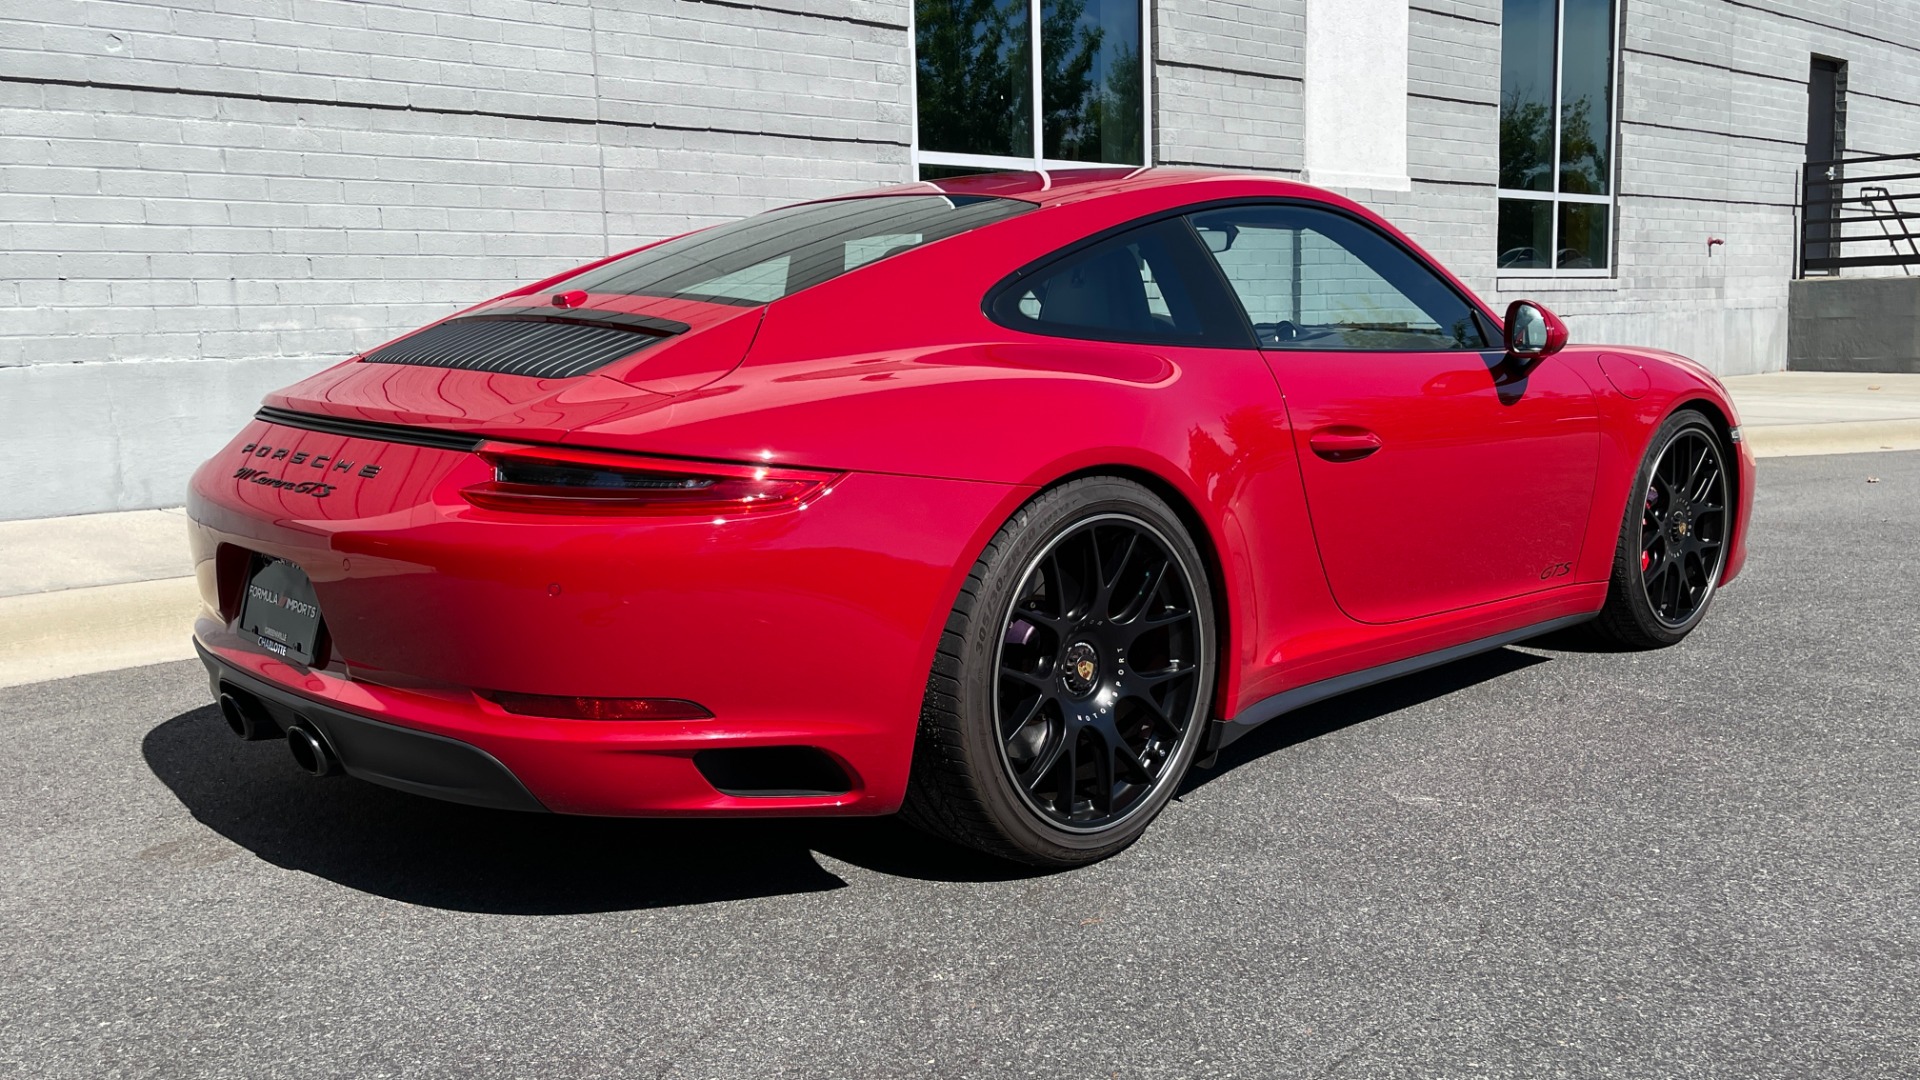 Used 2019 Porsche 911 Carrera GTS / TITANIUM EXHAUST / CARBON FIBER / TECHART SPRINGS / BBS WHEEL for sale $123,995 at Formula Imports in Charlotte NC 28227 17